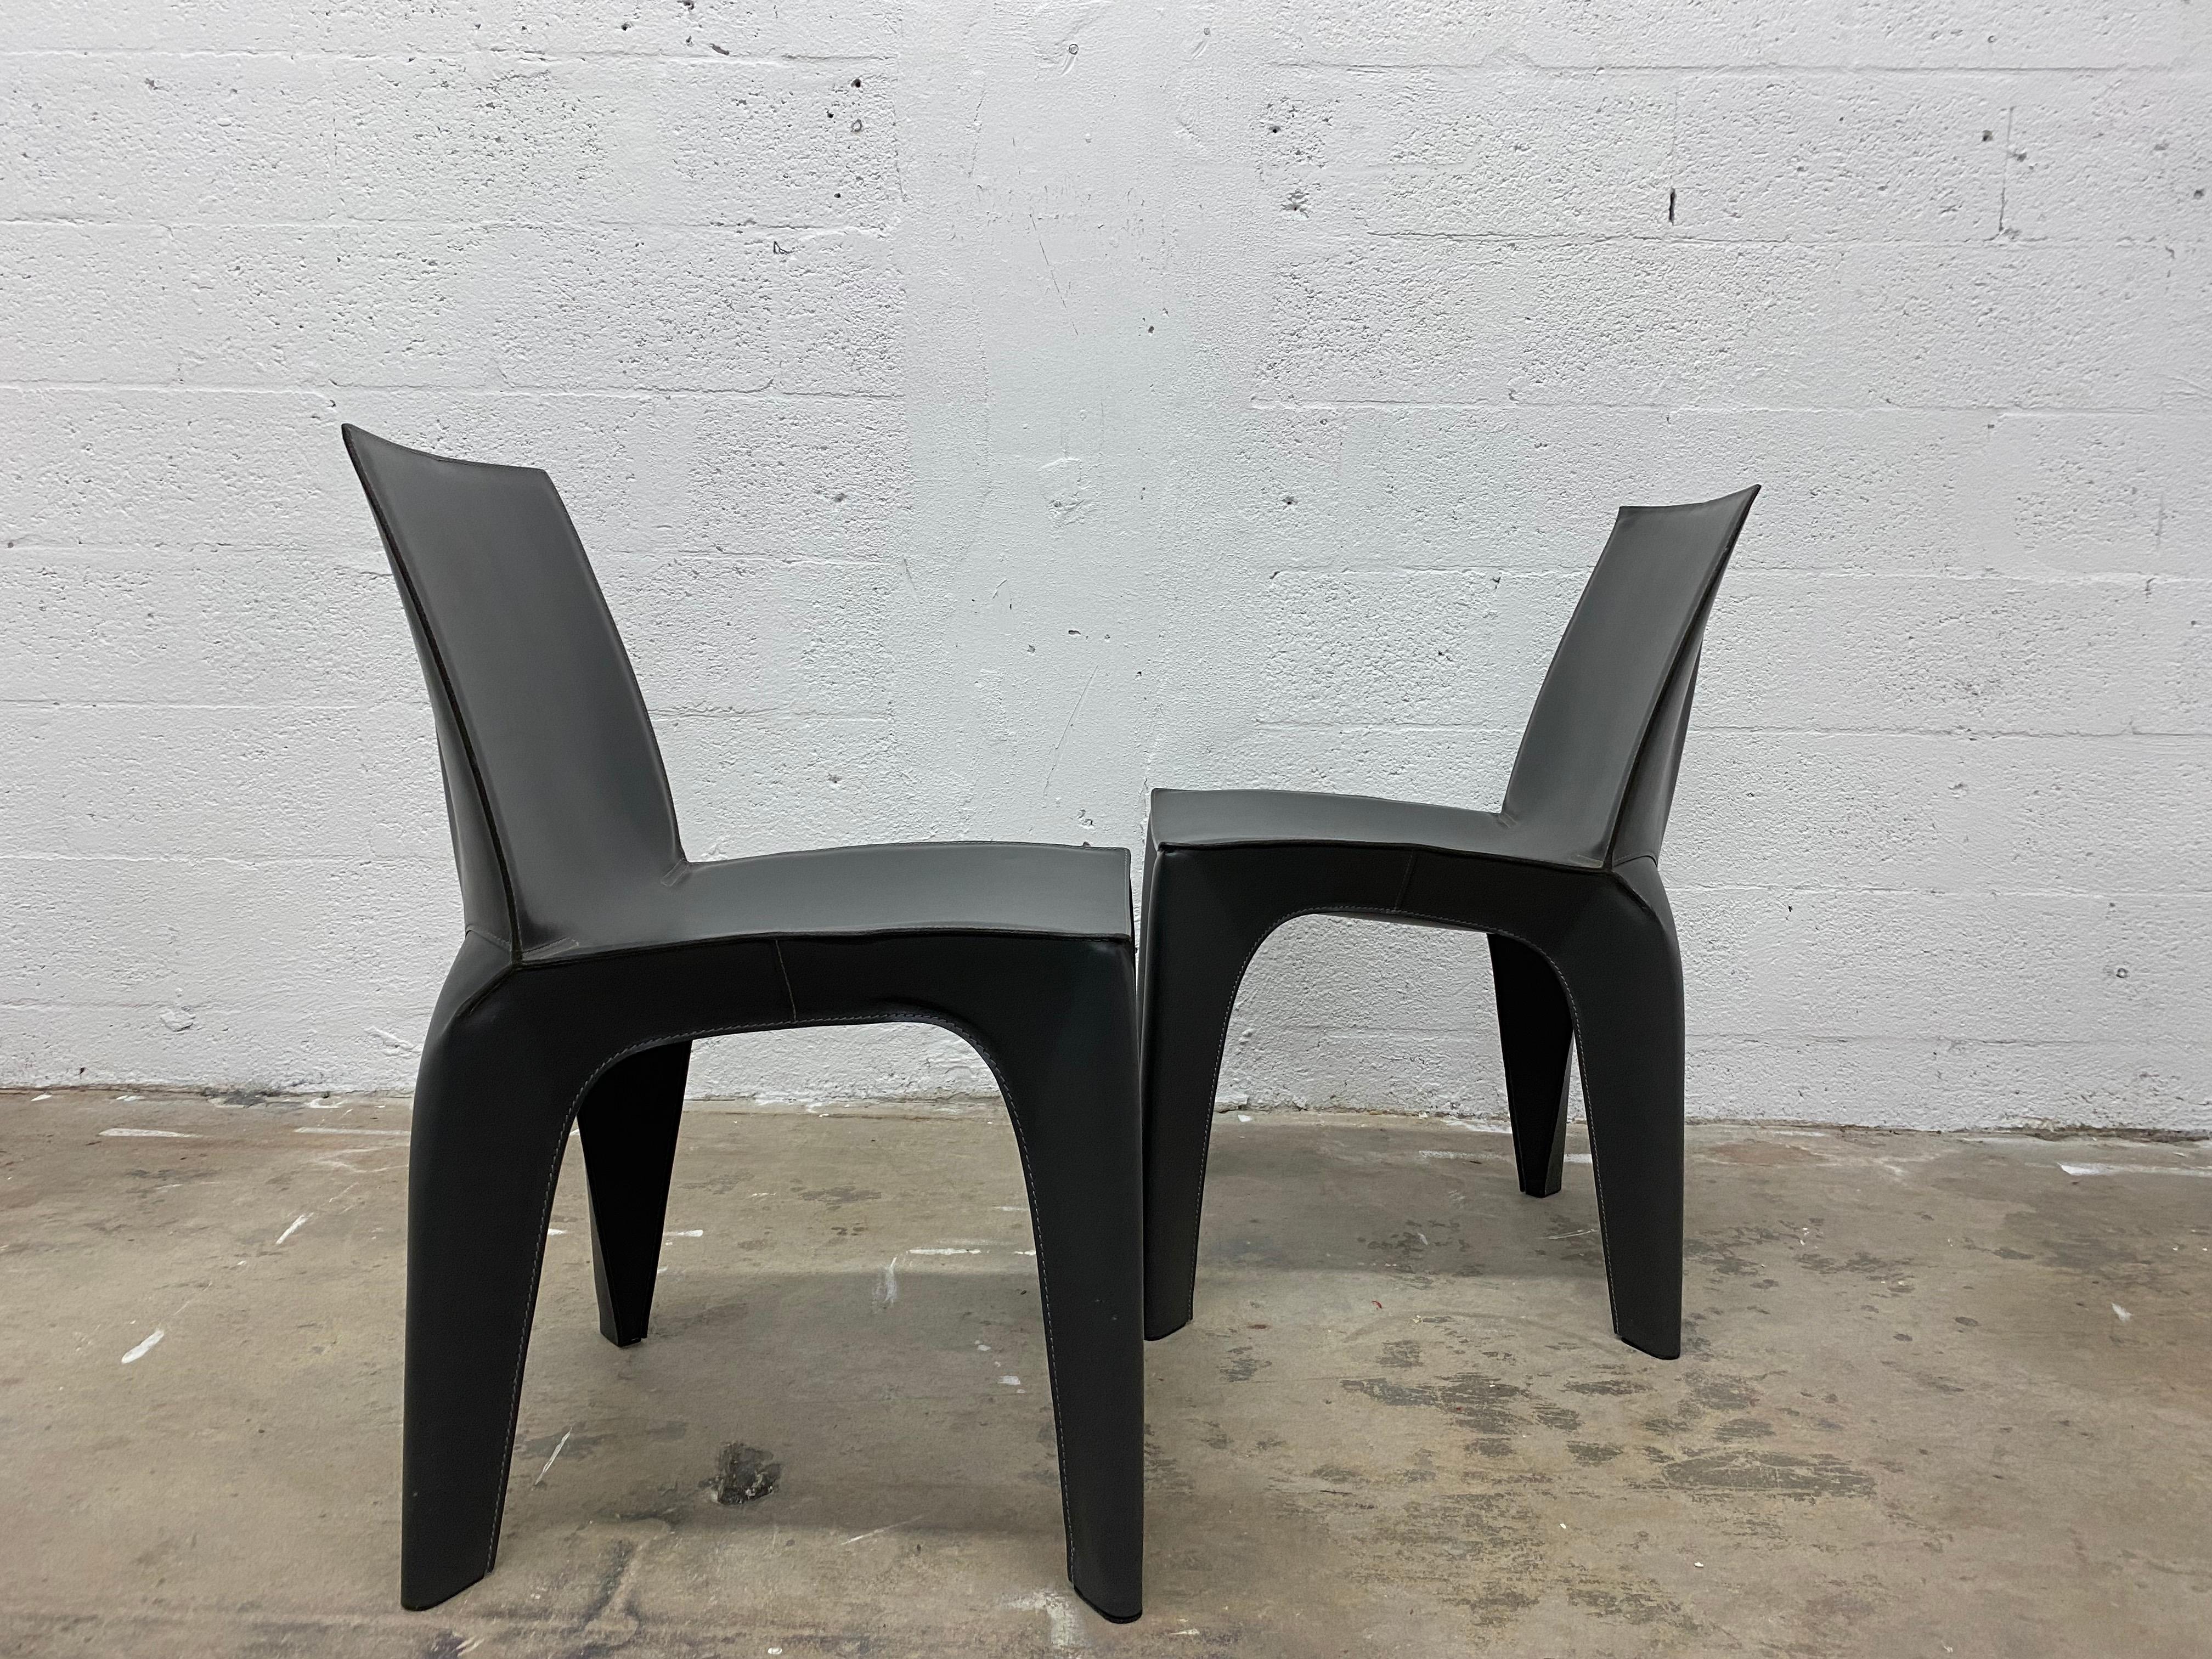 Contemporary Riccardo Blumer & Matteo Borghi BB Leather Dining Chairs for Poliform, a Pair For Sale